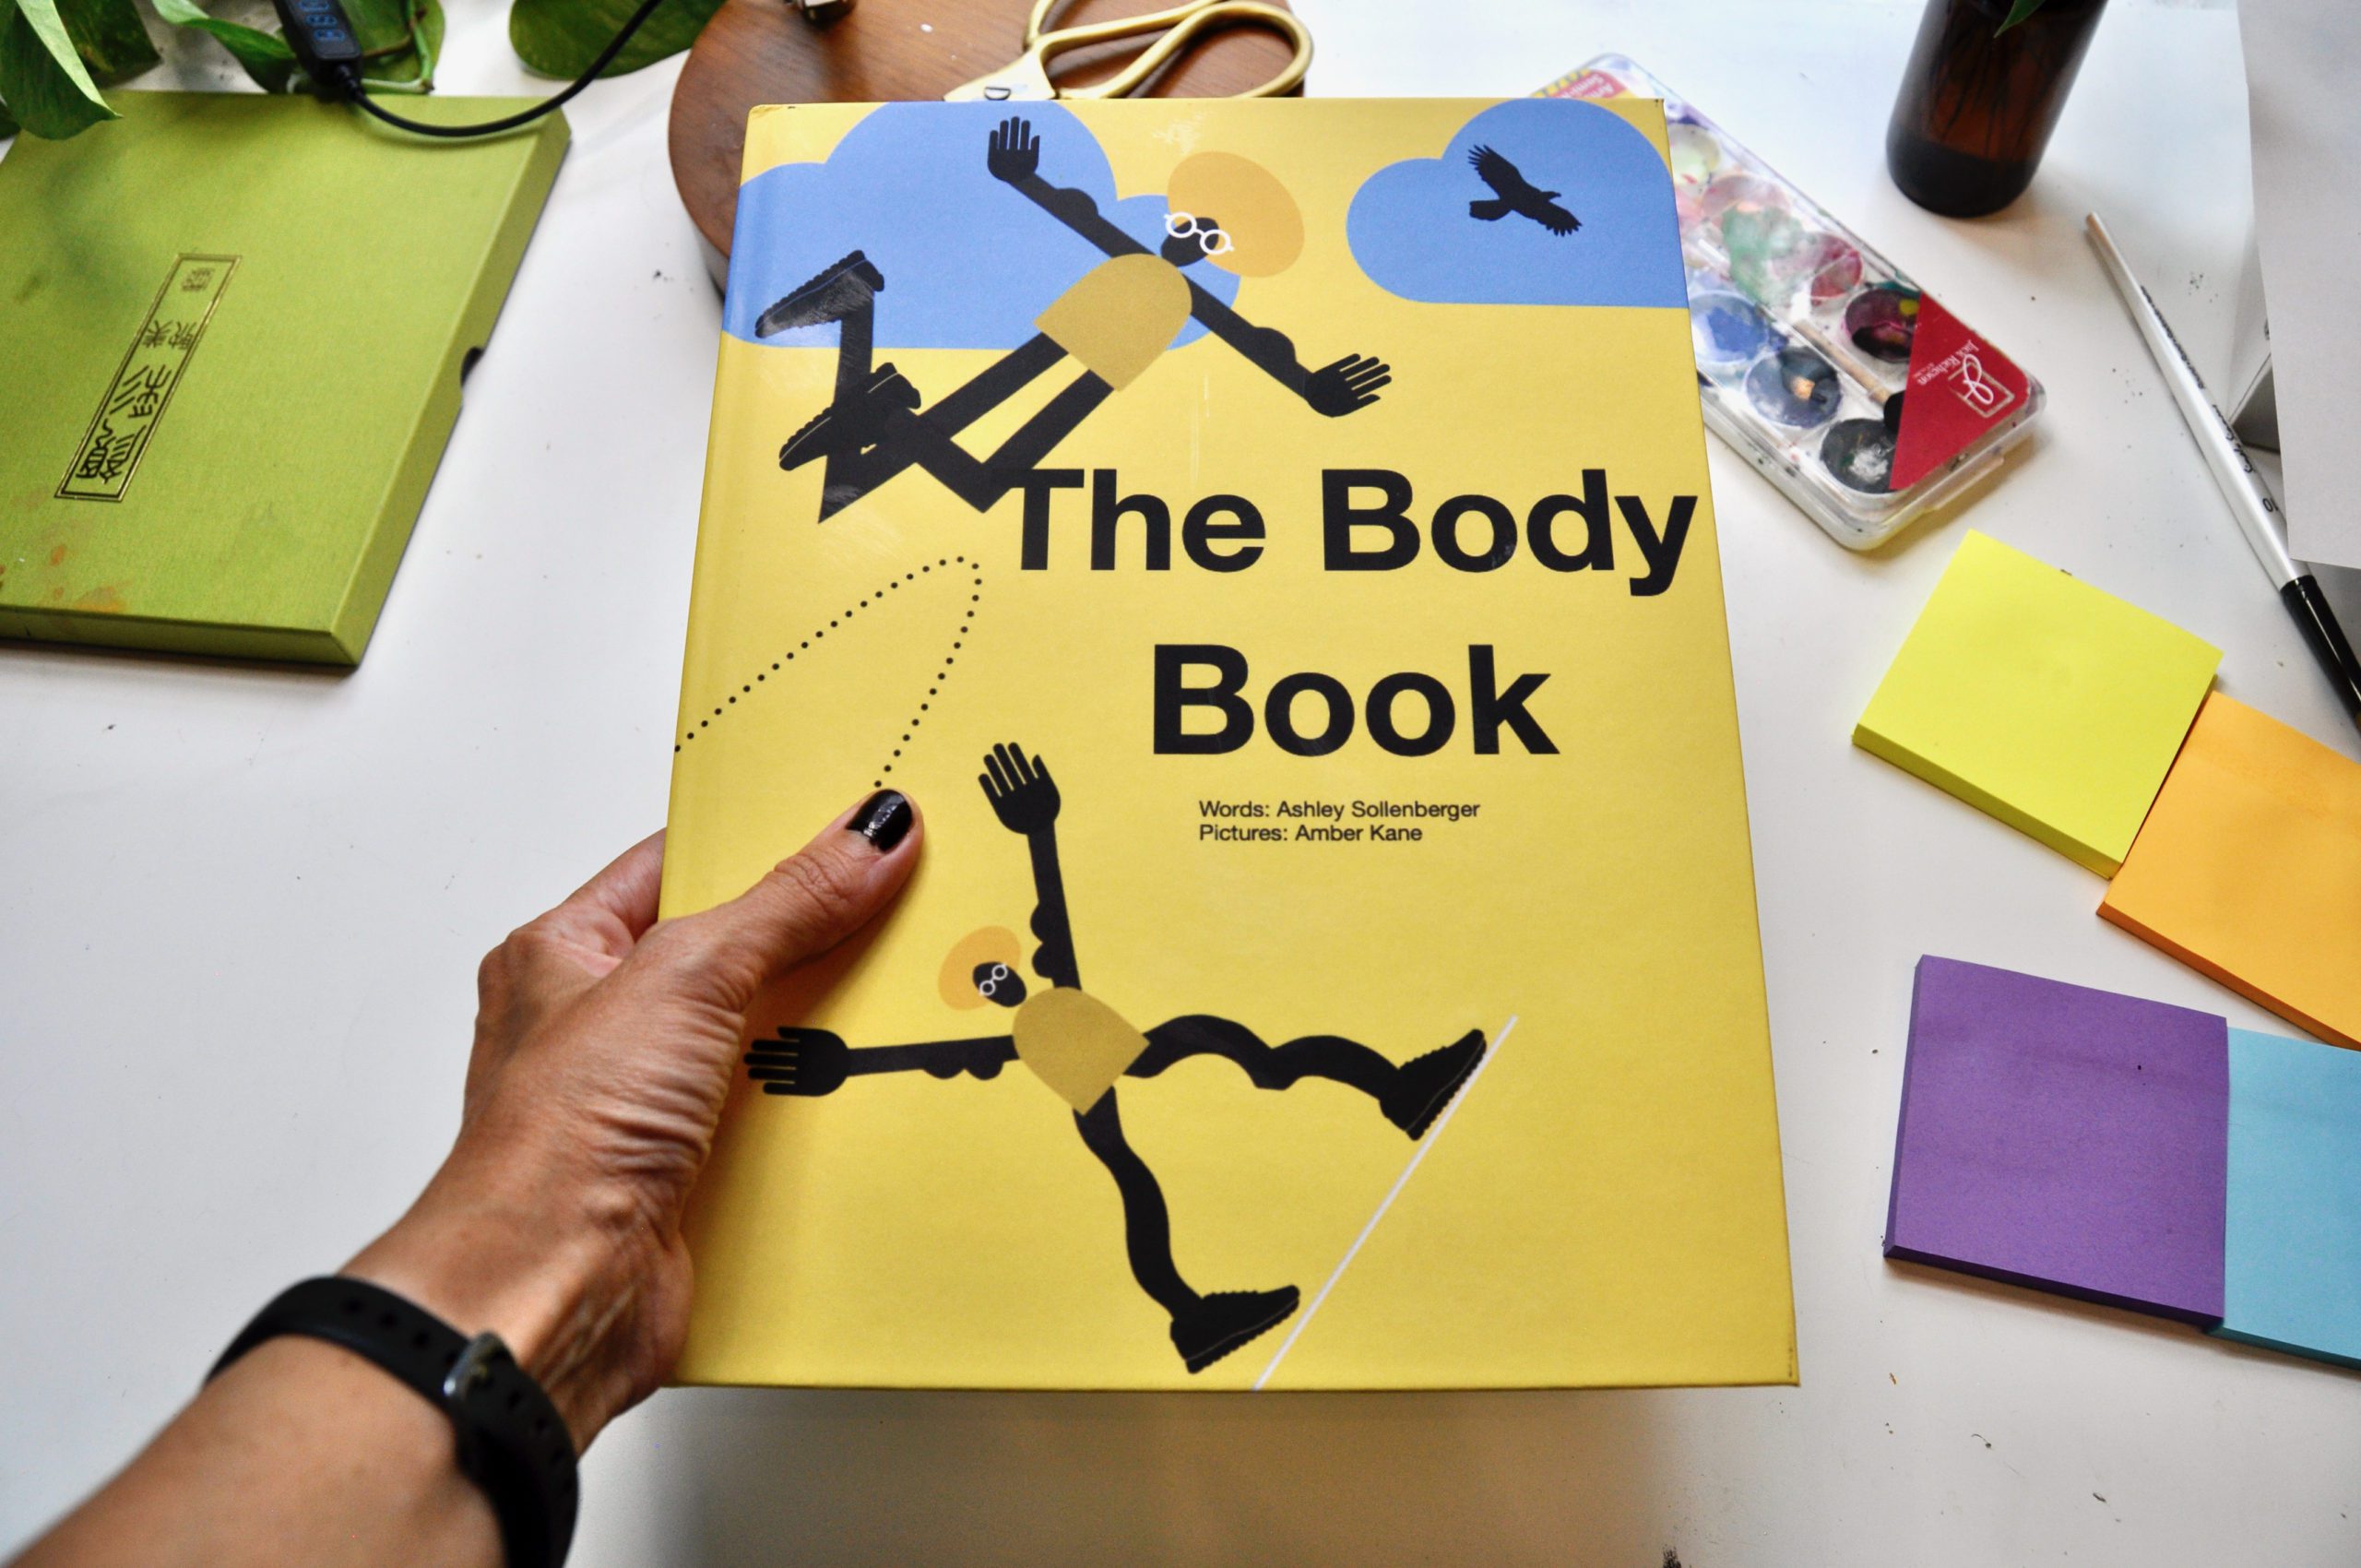 The Body Book in Action